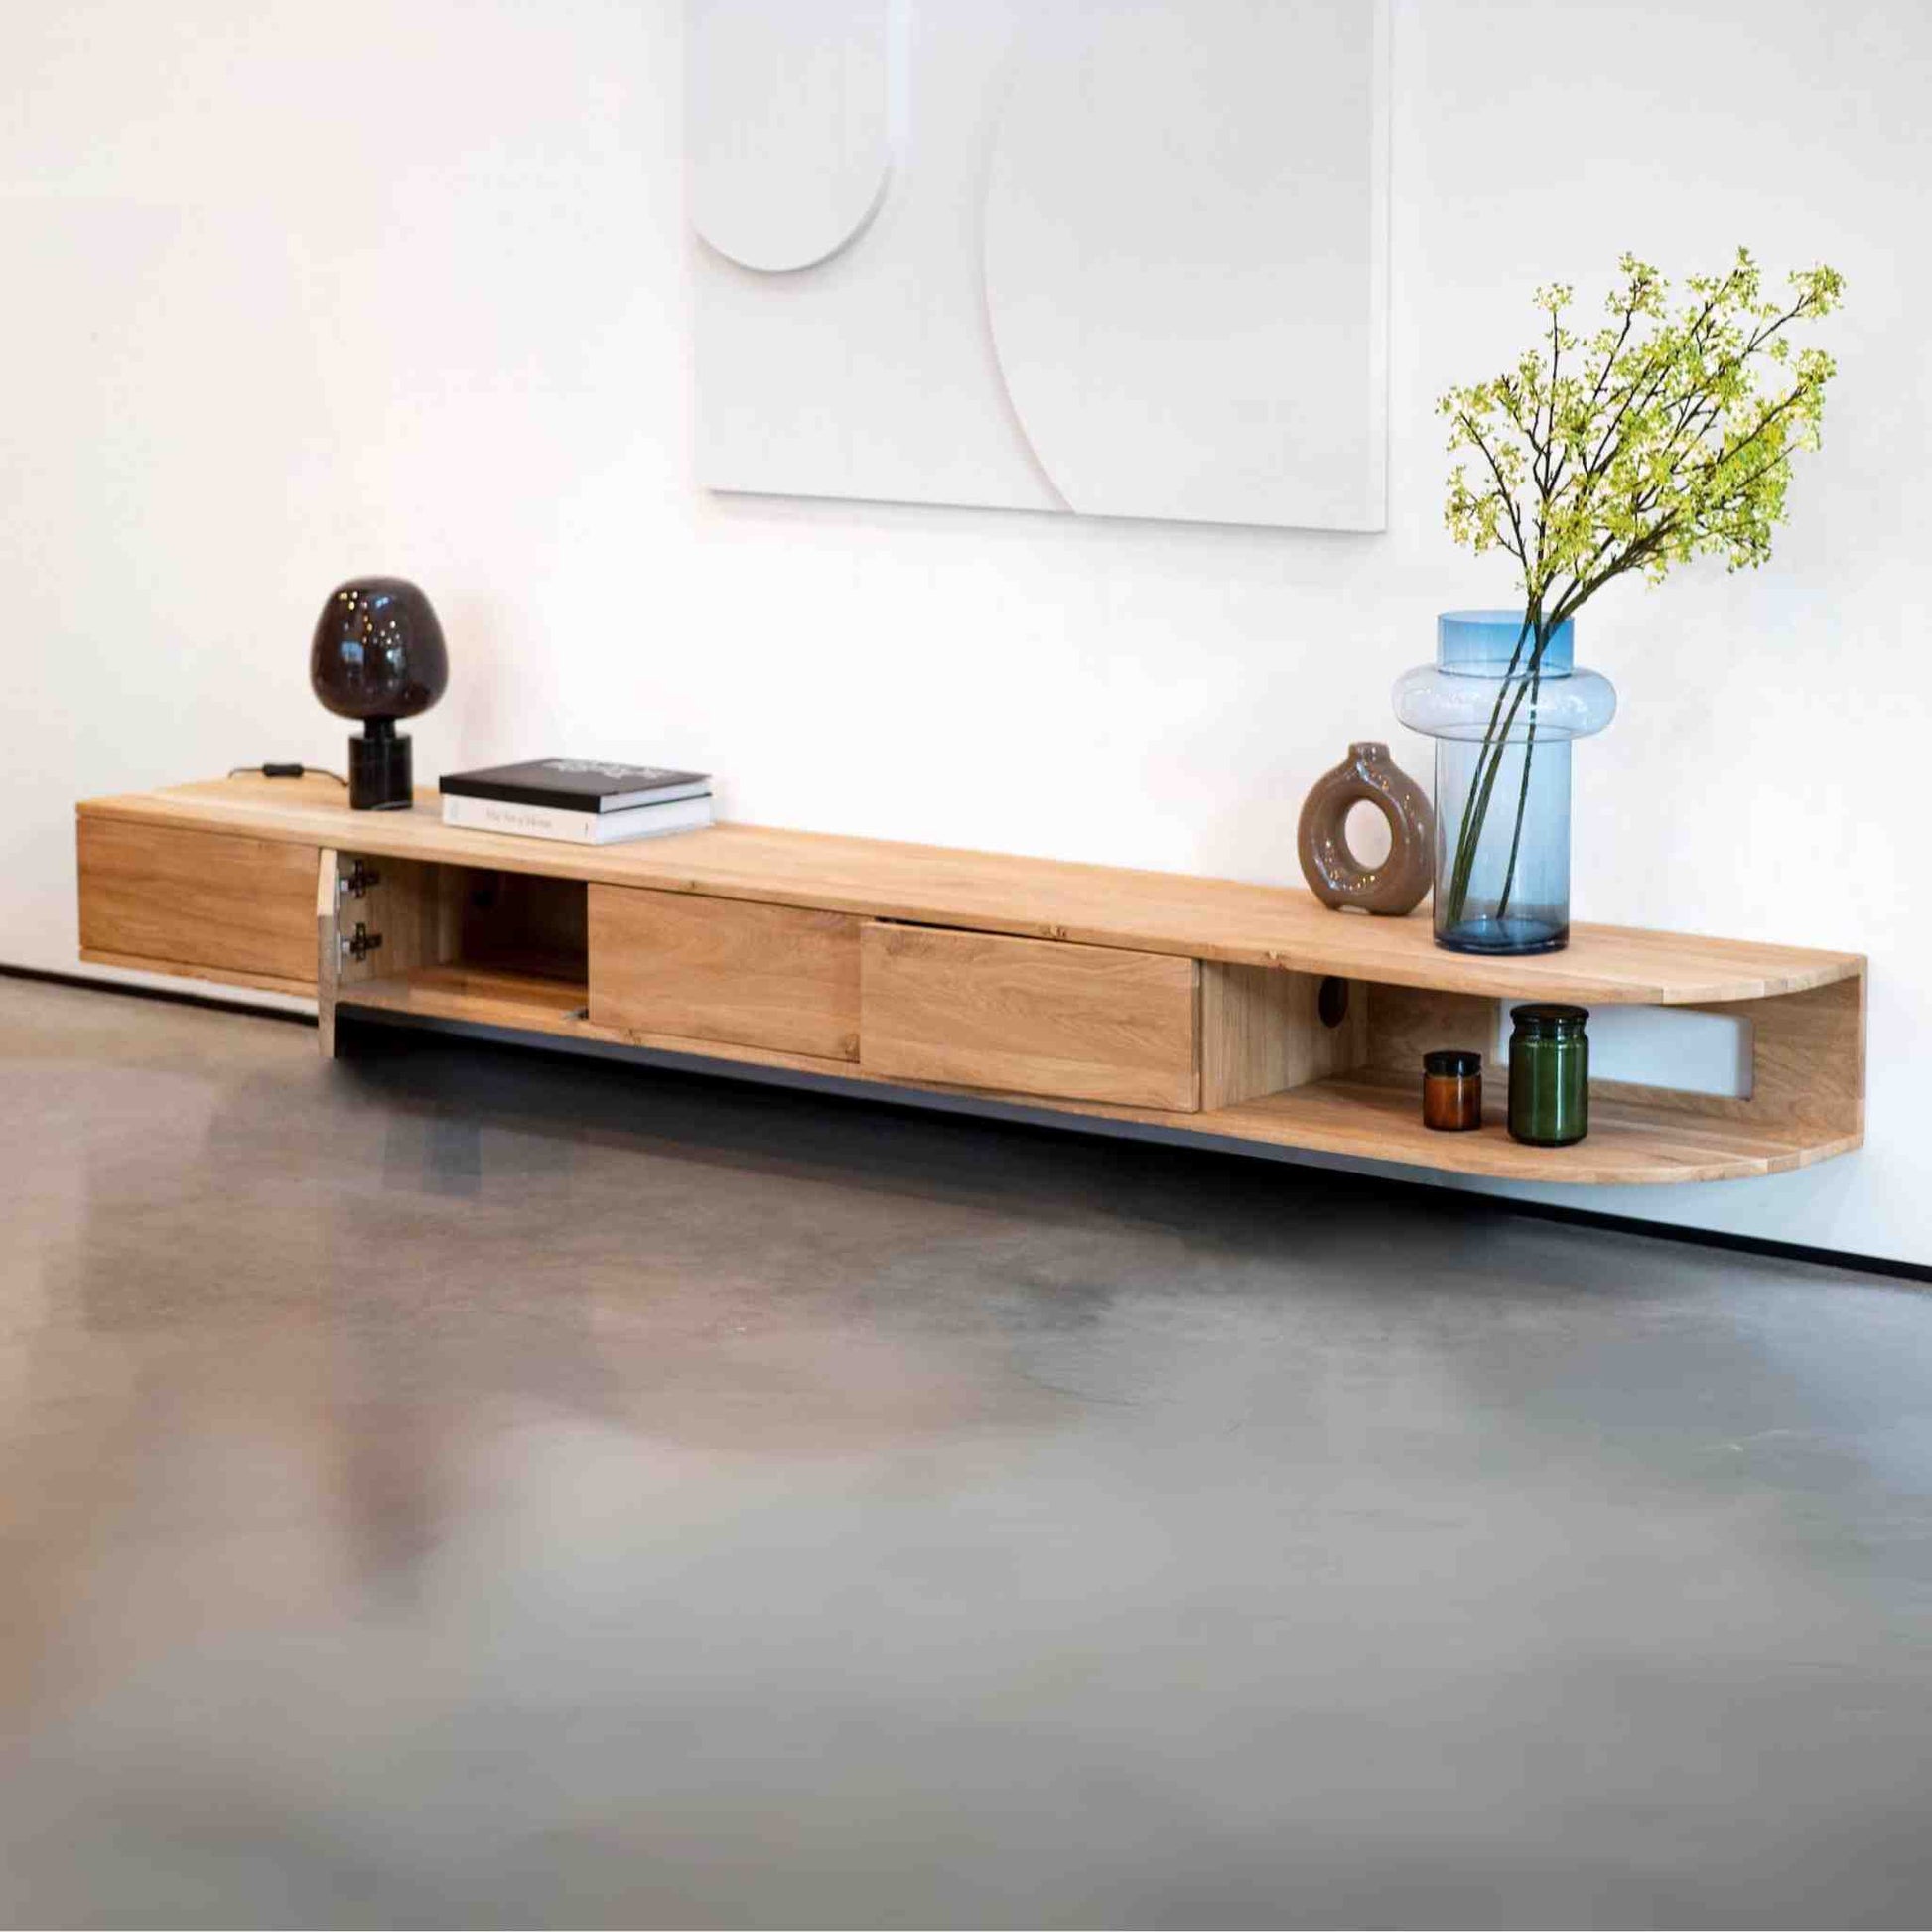 ÉTAUDORÉ San Salvatore wall mounted TV cabinet with one rounded edge, made to order from solid oak wood